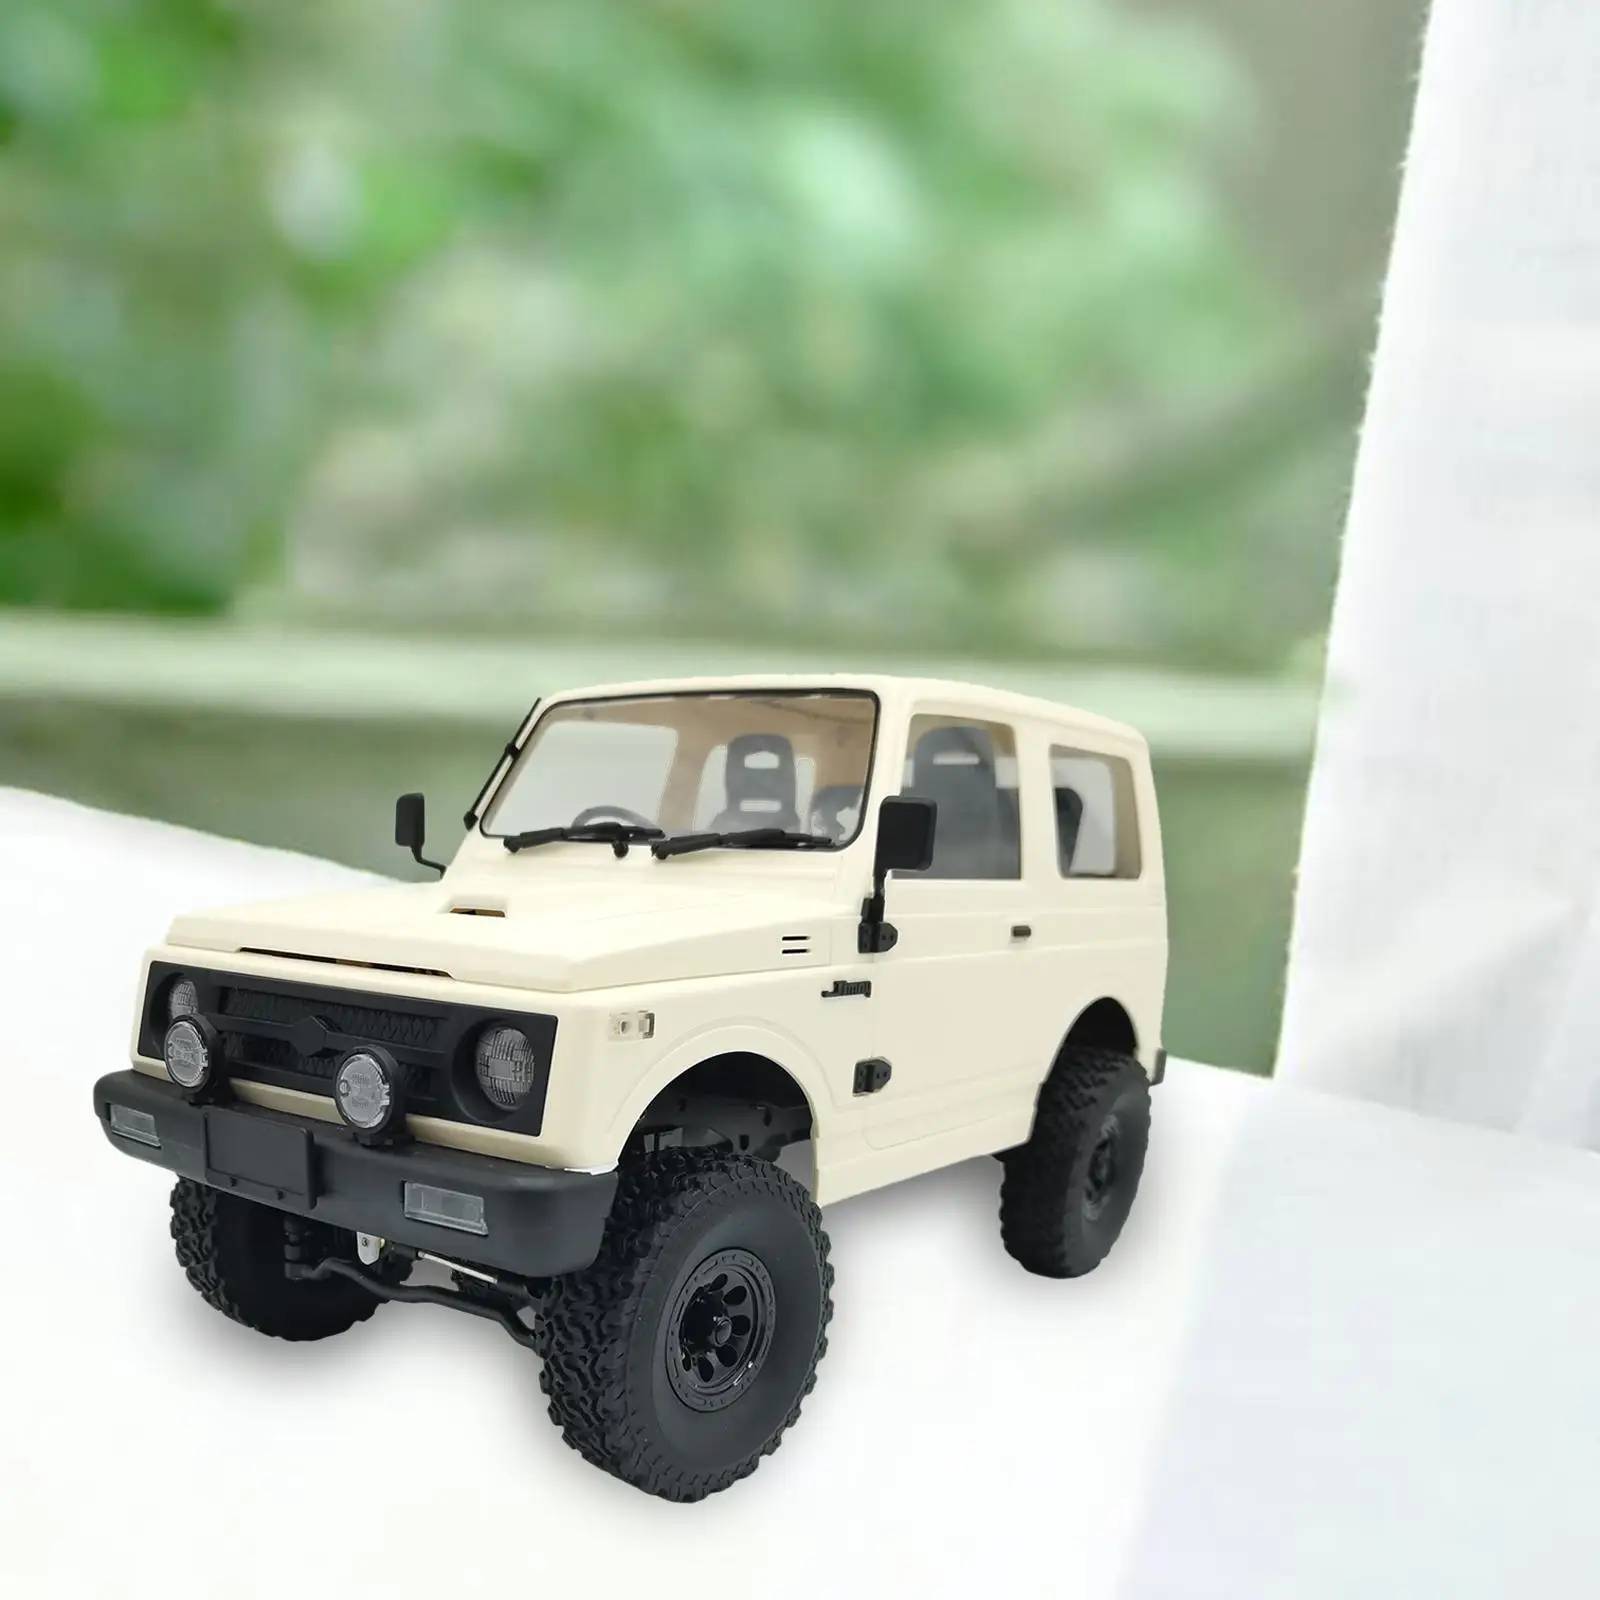 C74 4WD Electric Hobby Toy Climbing Car Model 1/10 WL01 RC Car Toy Vehicles Toy Hobby Grade Toy for Children Boy Girl Kids Gift